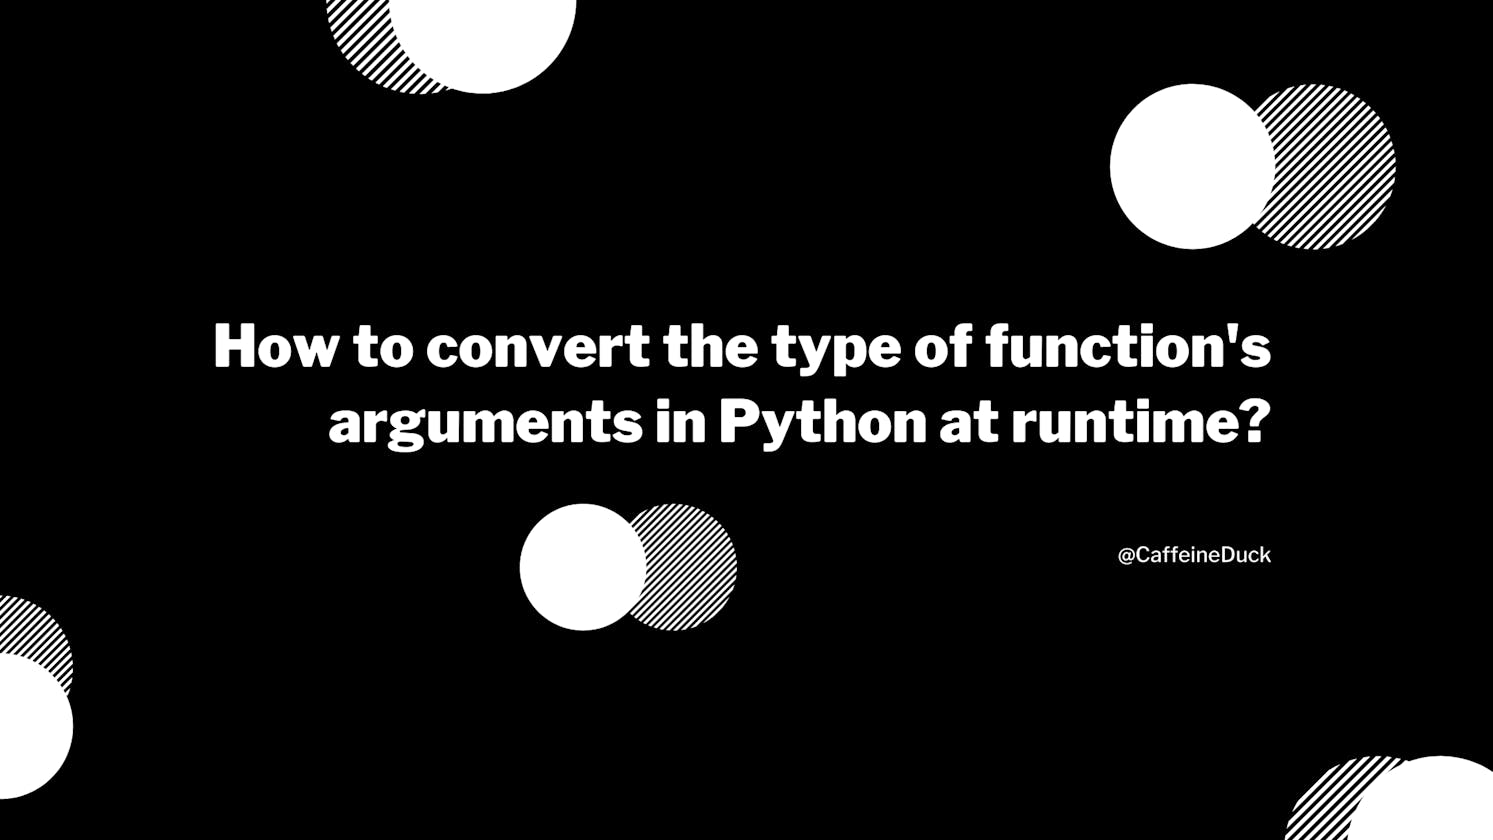 How to convert the type of function's arguments in Python at runtime?